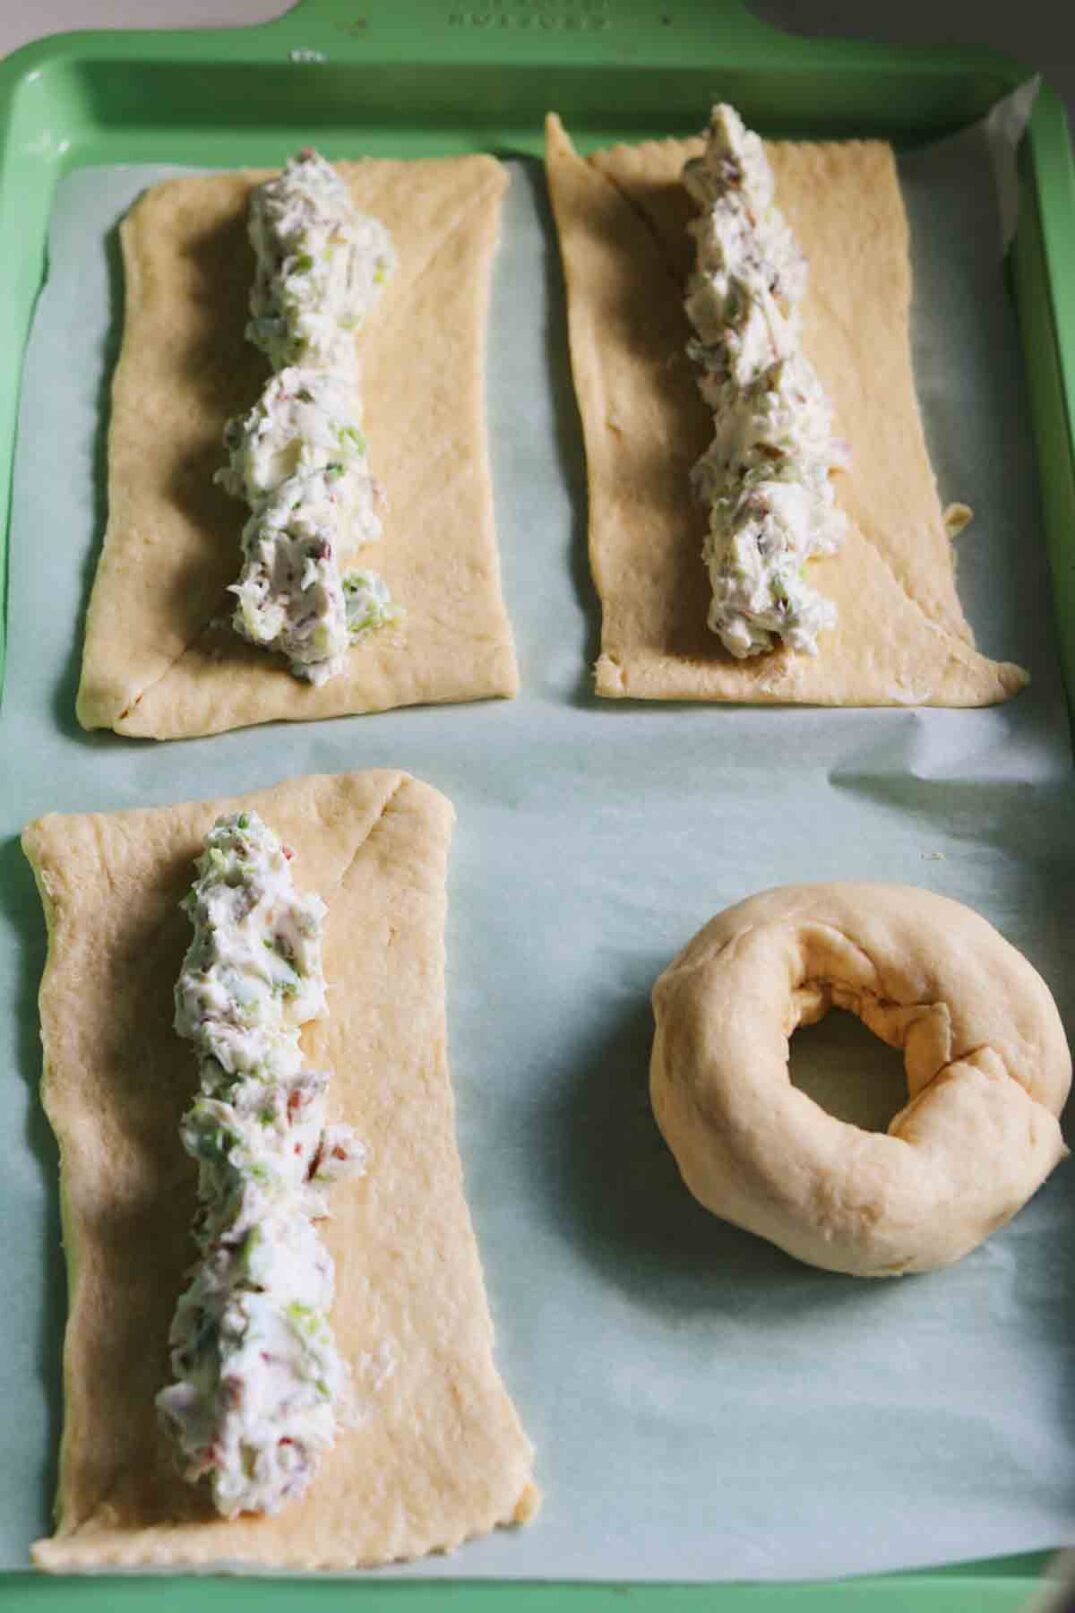 bacon scallion cream cheese getting wrapped up in a stuffed bagel.